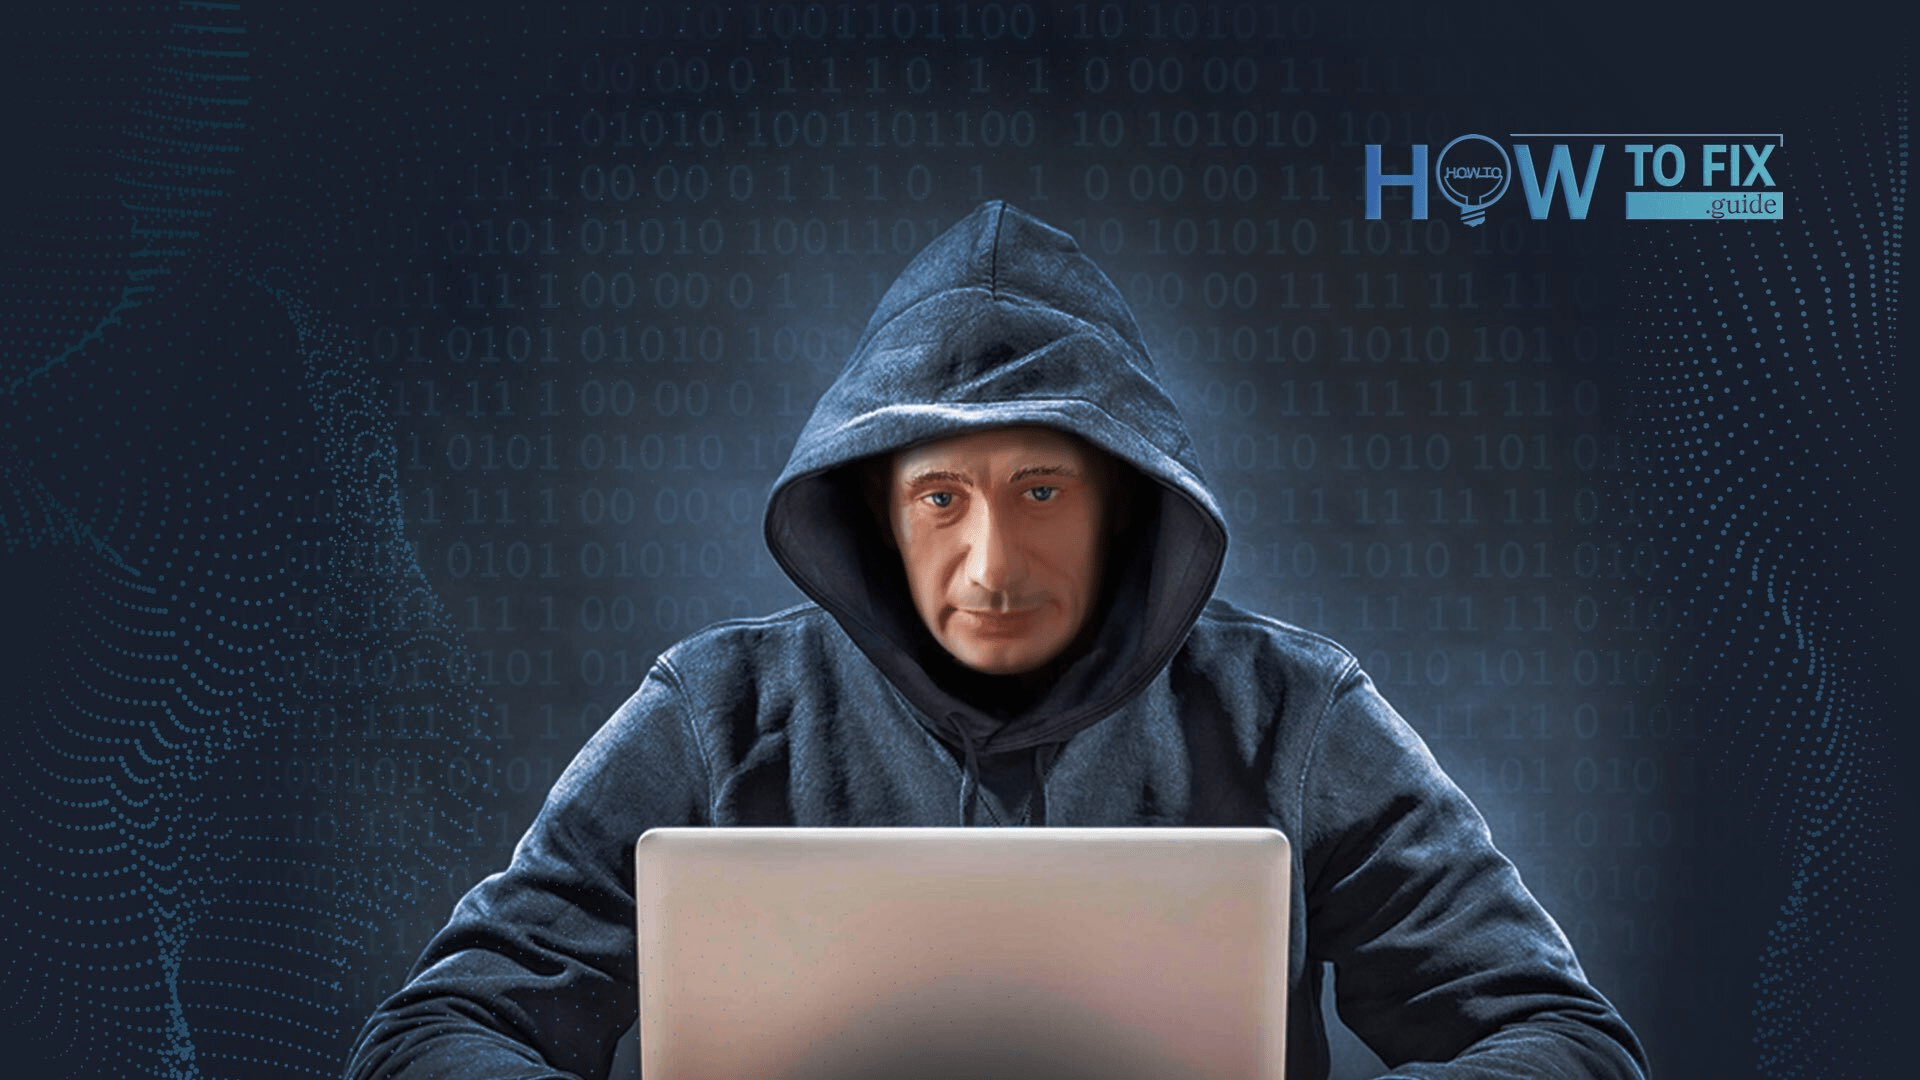 Each 5th russian citizen wants to became a hacker